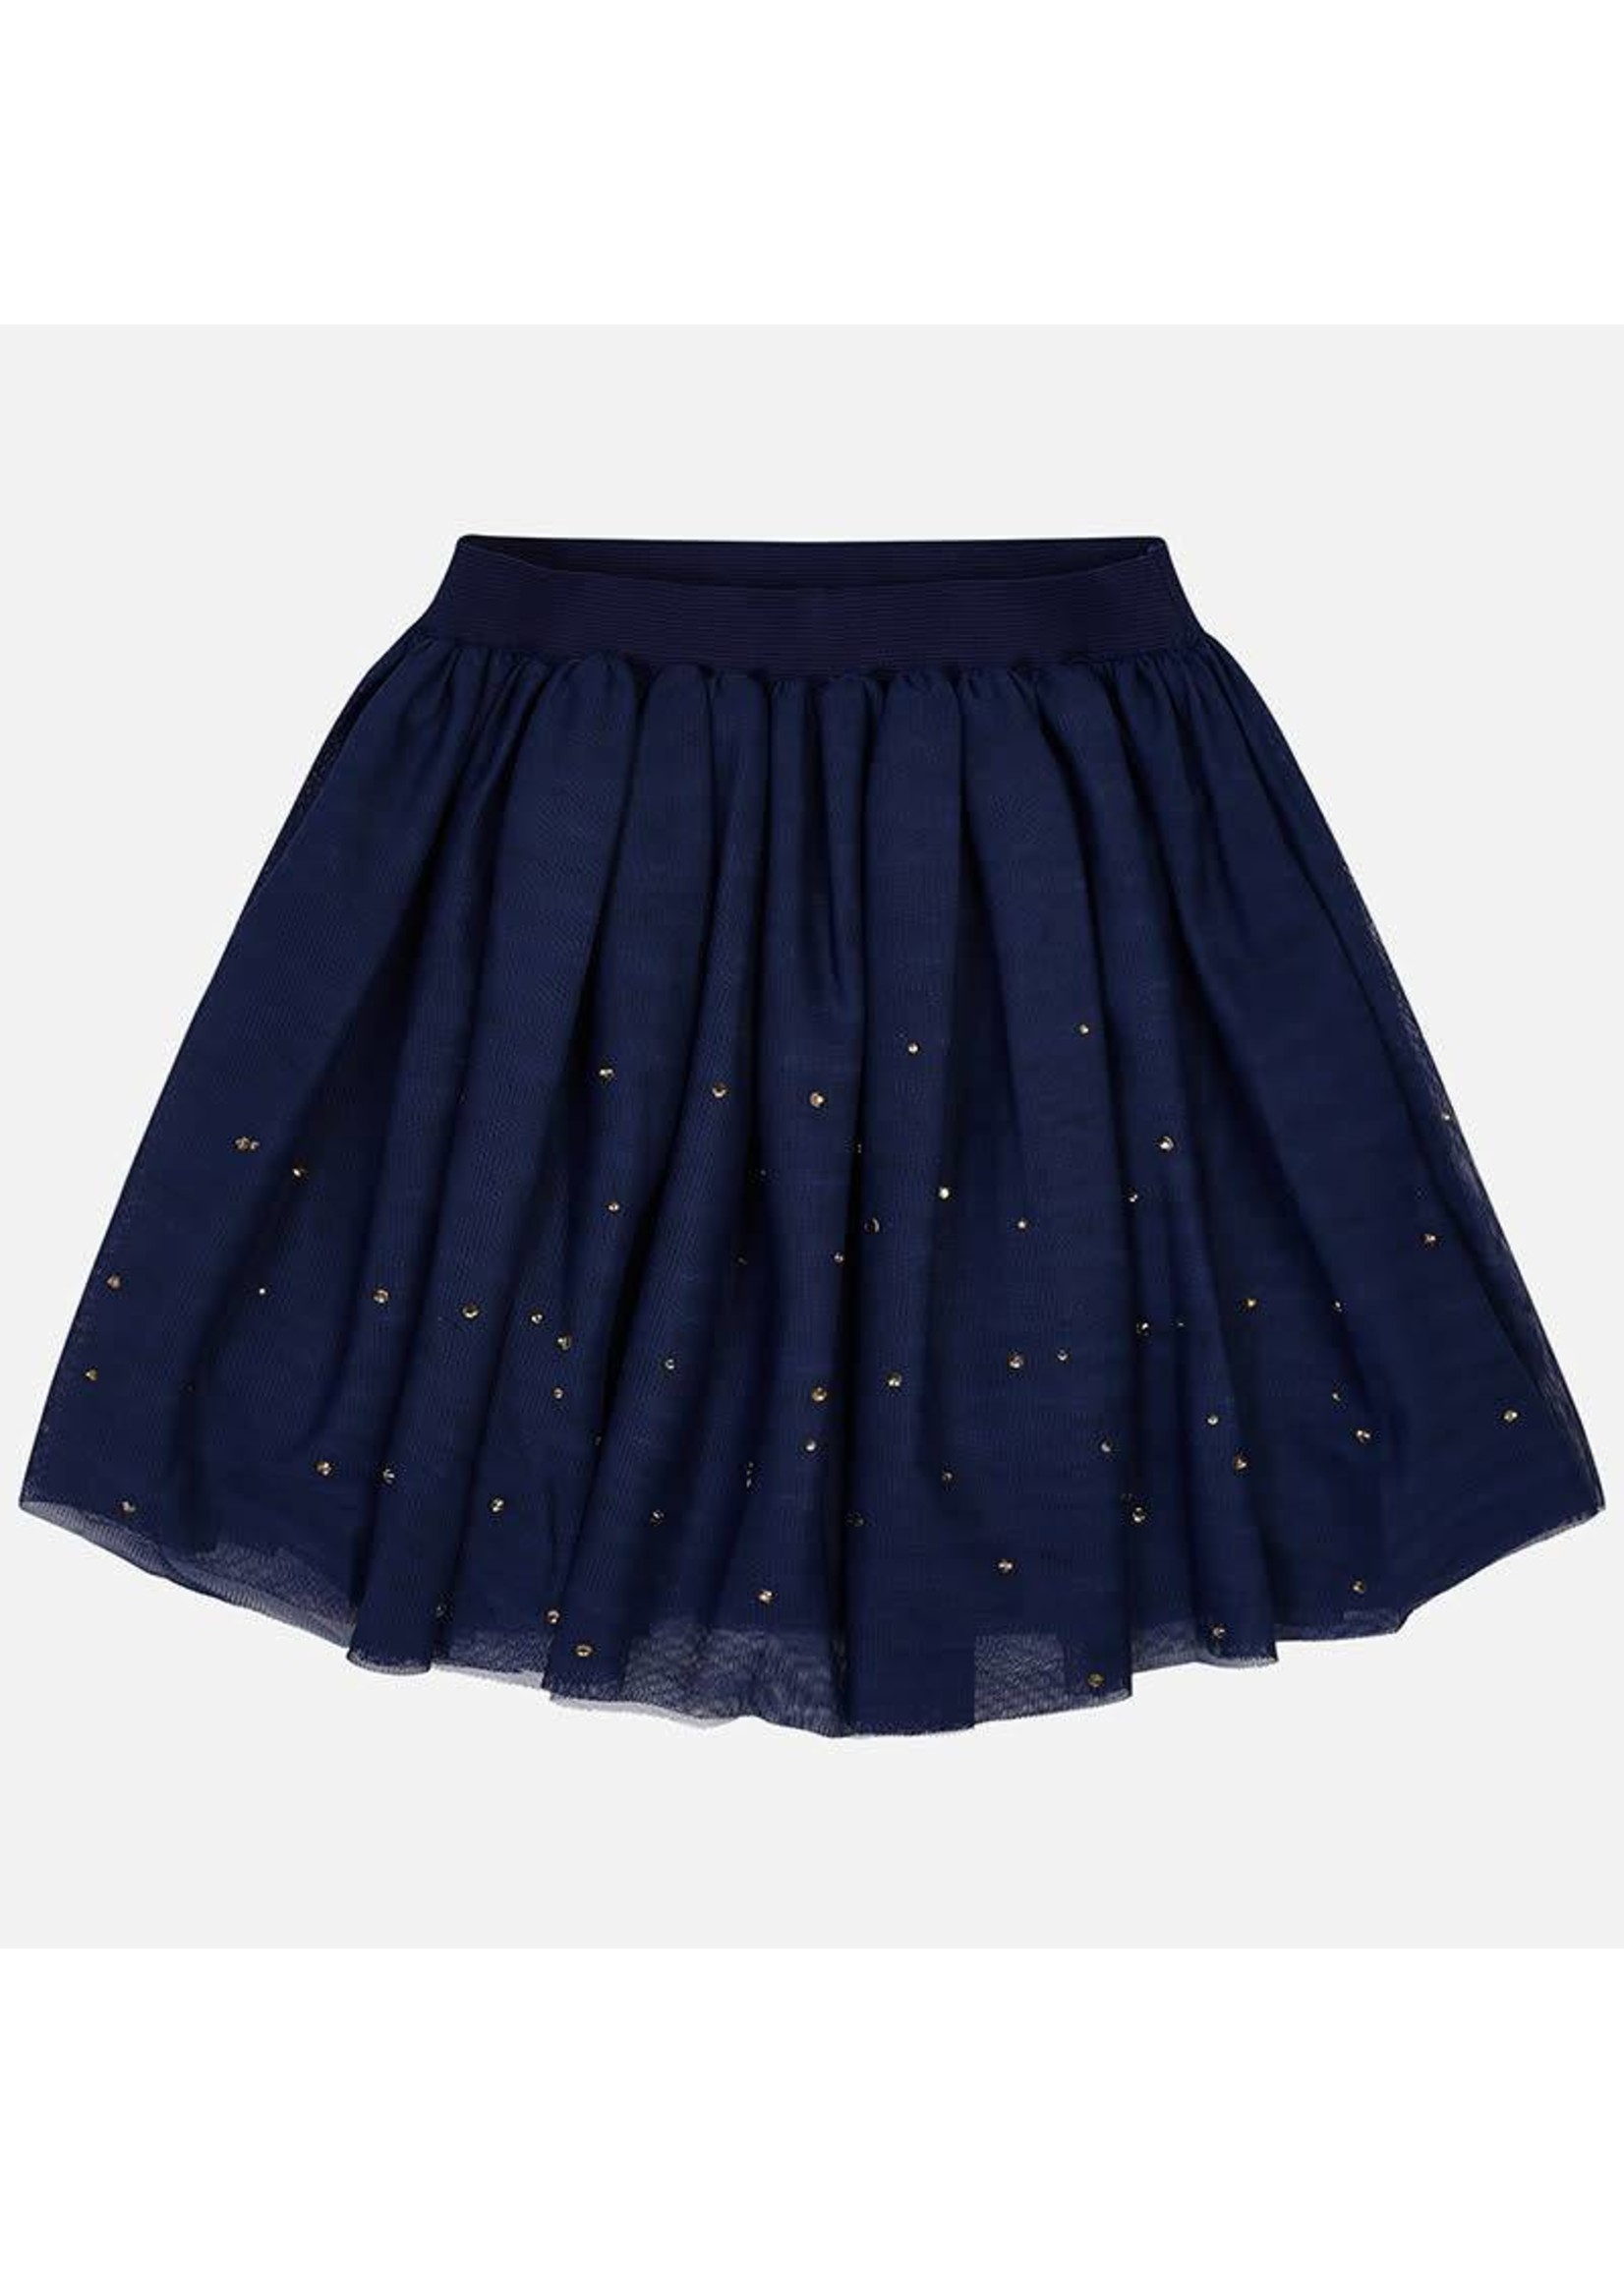 Mayoral Mayoral Tulle skirt Eclipse - 06902